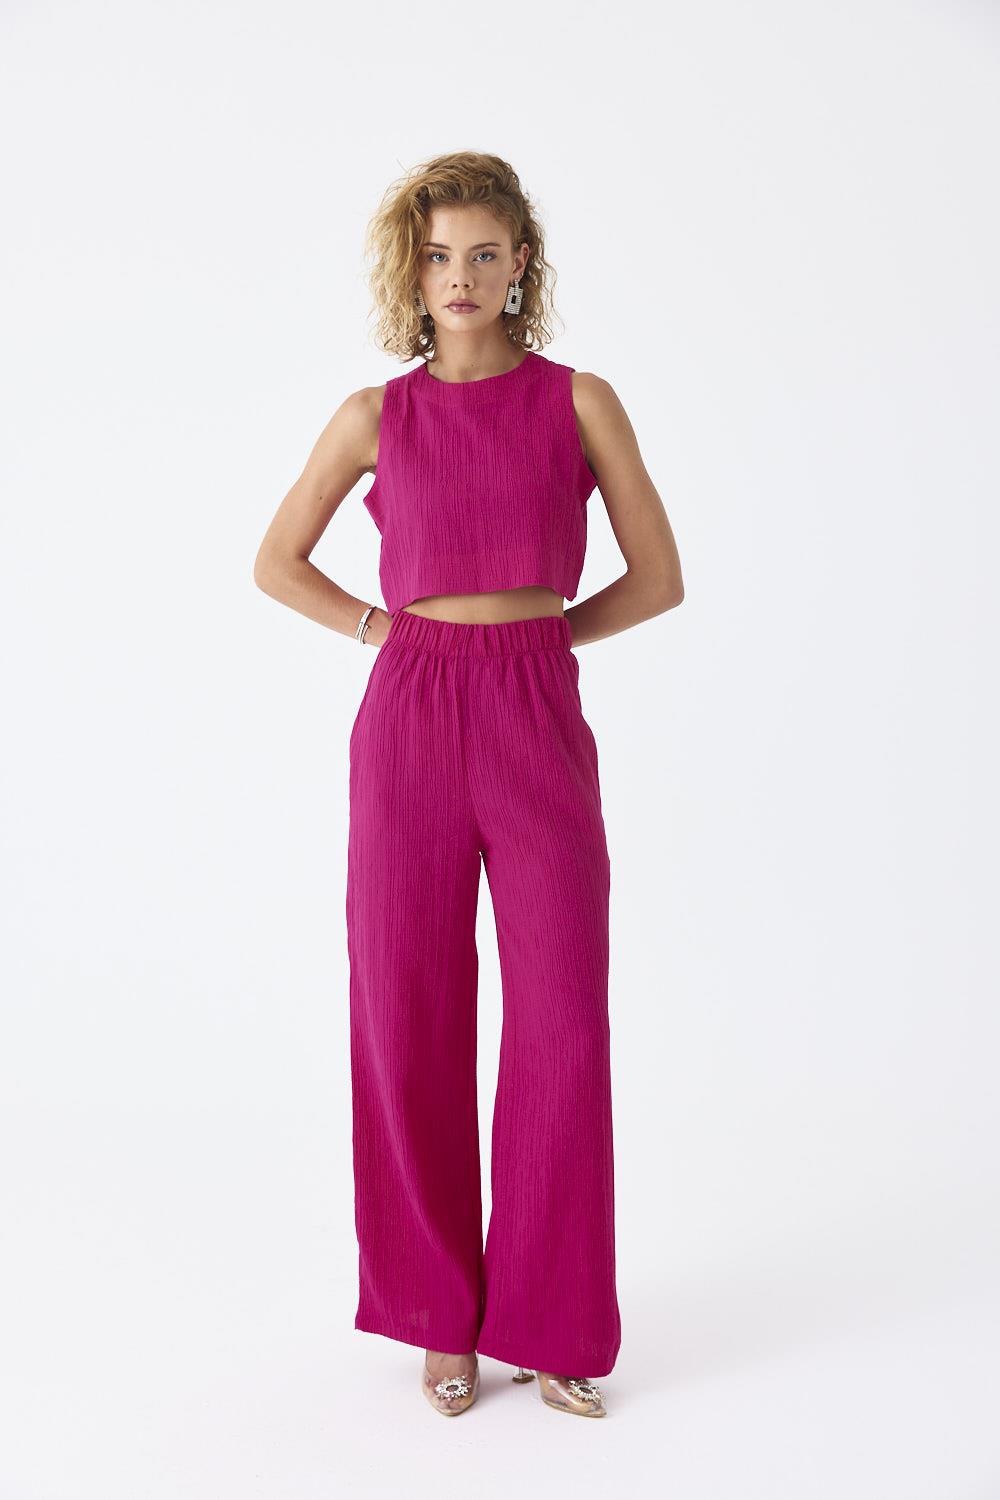 A model wears TBU11772 - Zero Sleeve Blouse And Pants Women's Suit - Fuchsia, wholesale Suit of Tuba Butik to display at Lonca